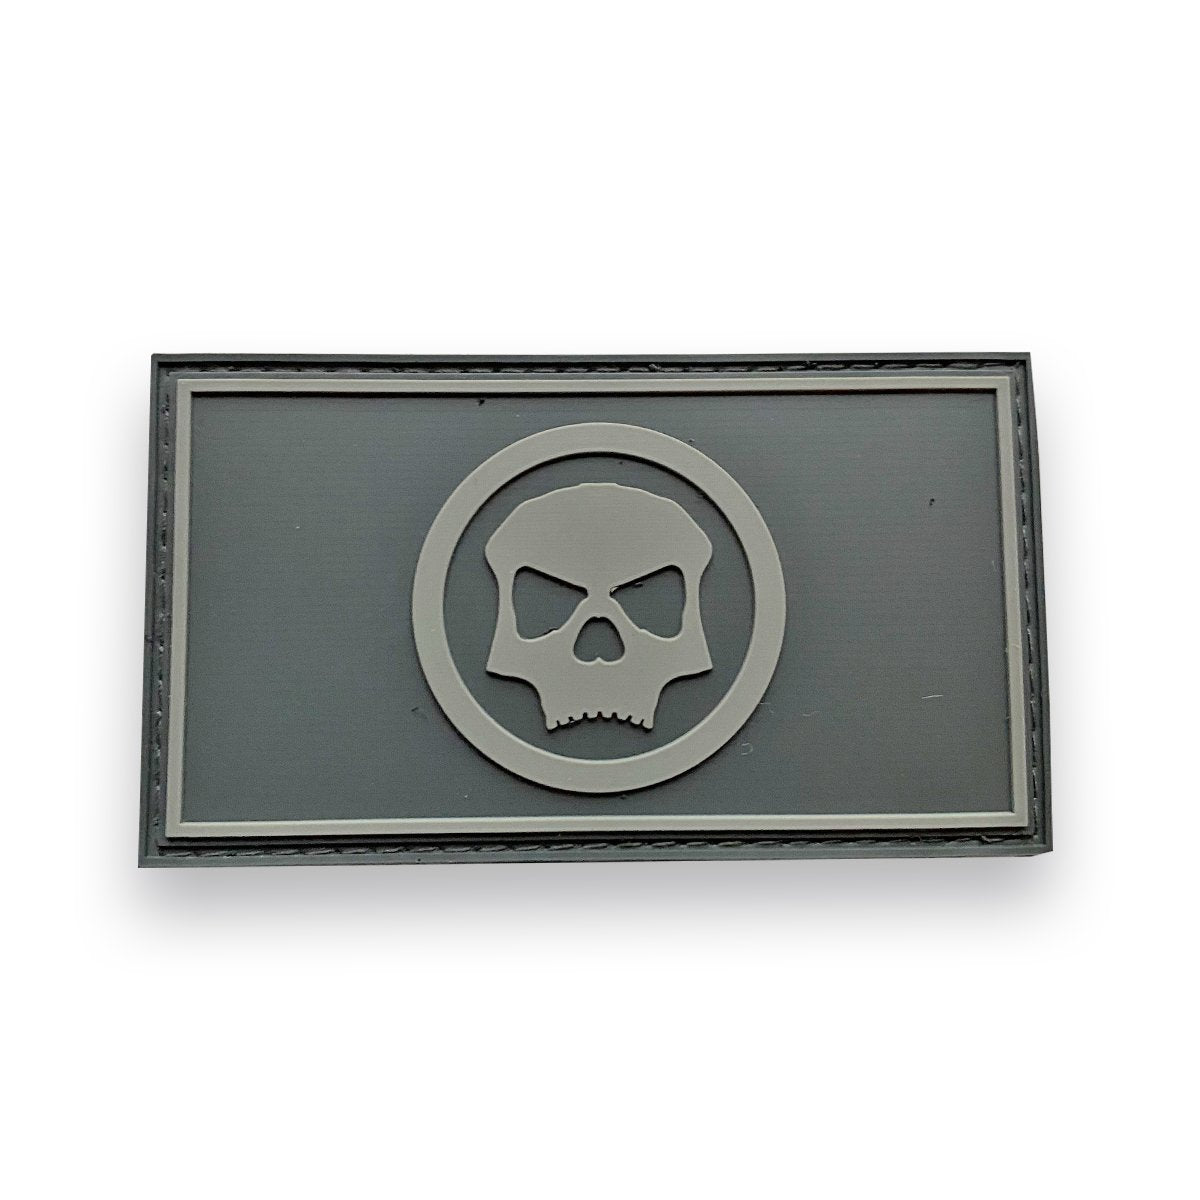 Infamous Paintball "Circle Skull" Full Style Patch - Grey